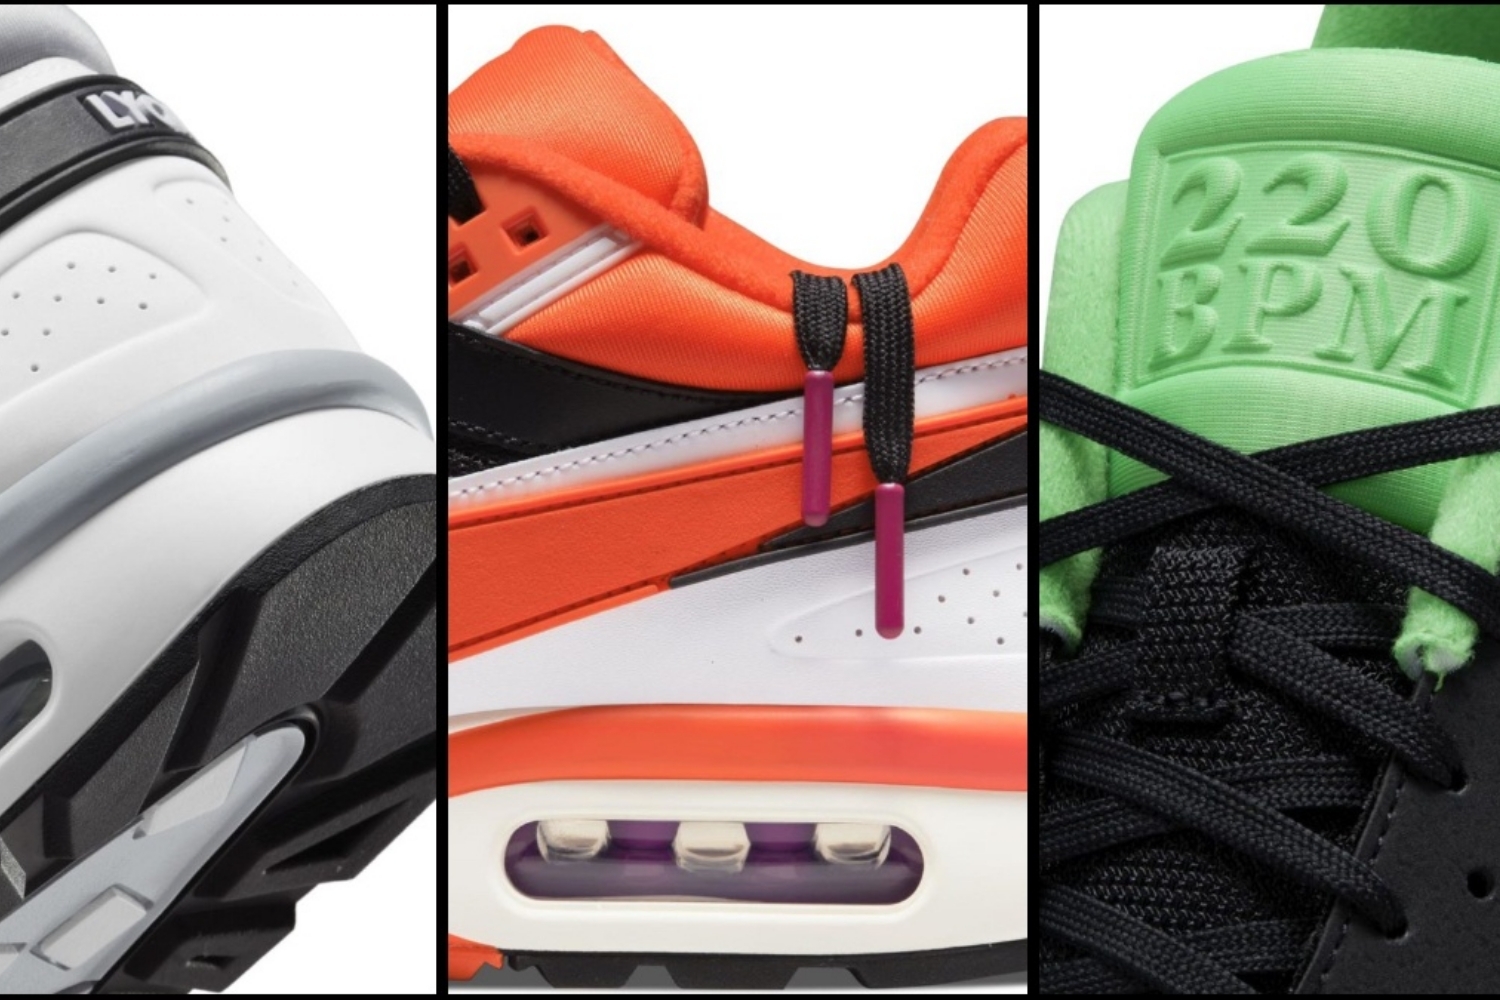 The Nike Air Max BW comes in a City Pack